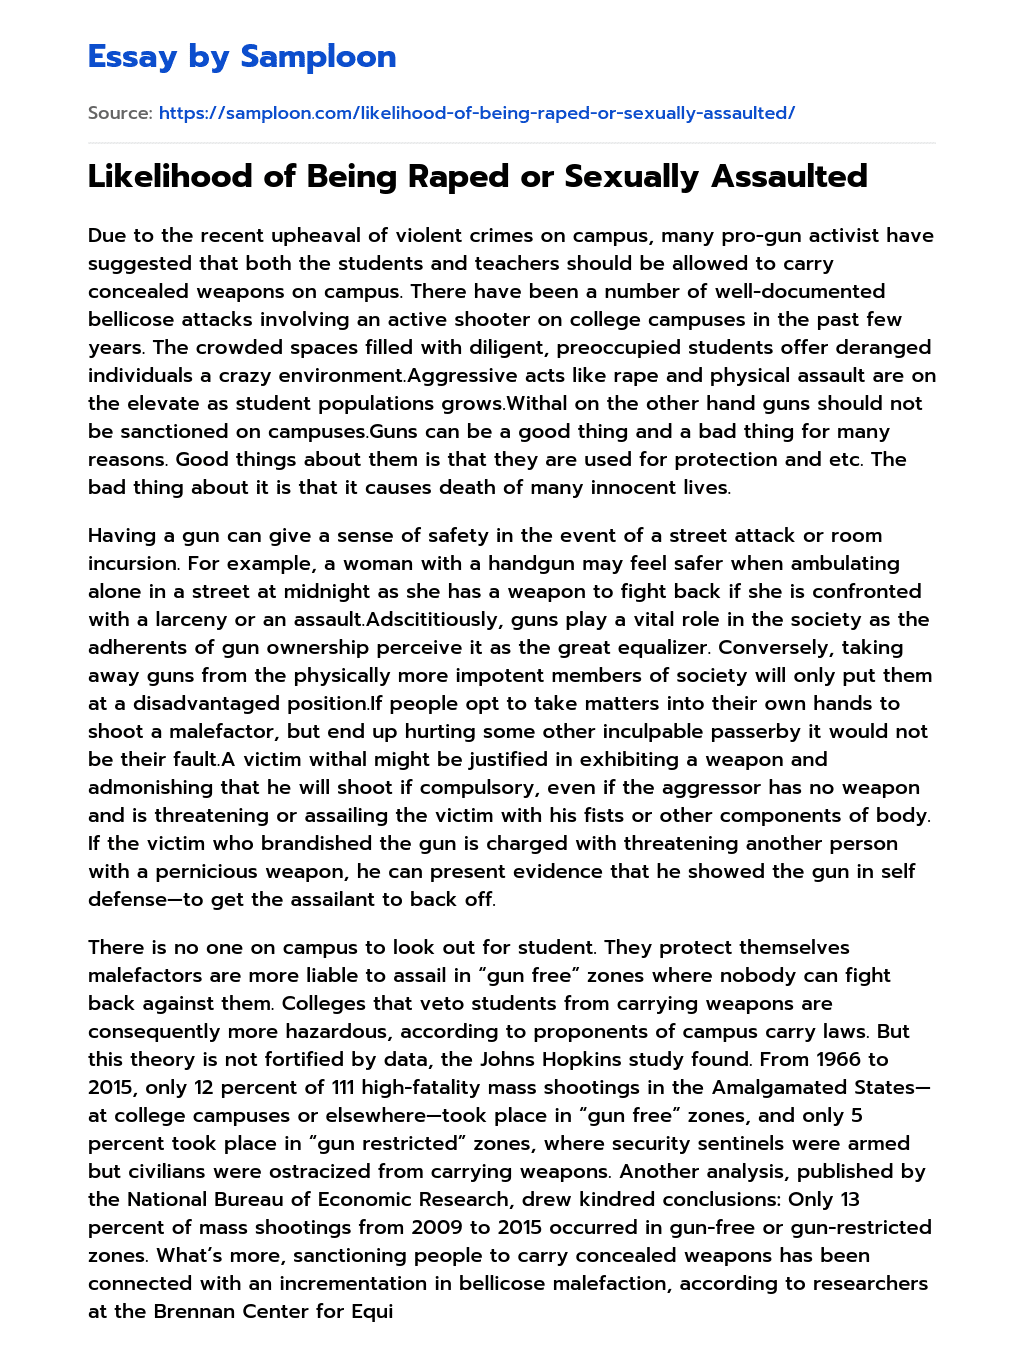 Likelihood of Being Raped or Sexually Assaulted essay